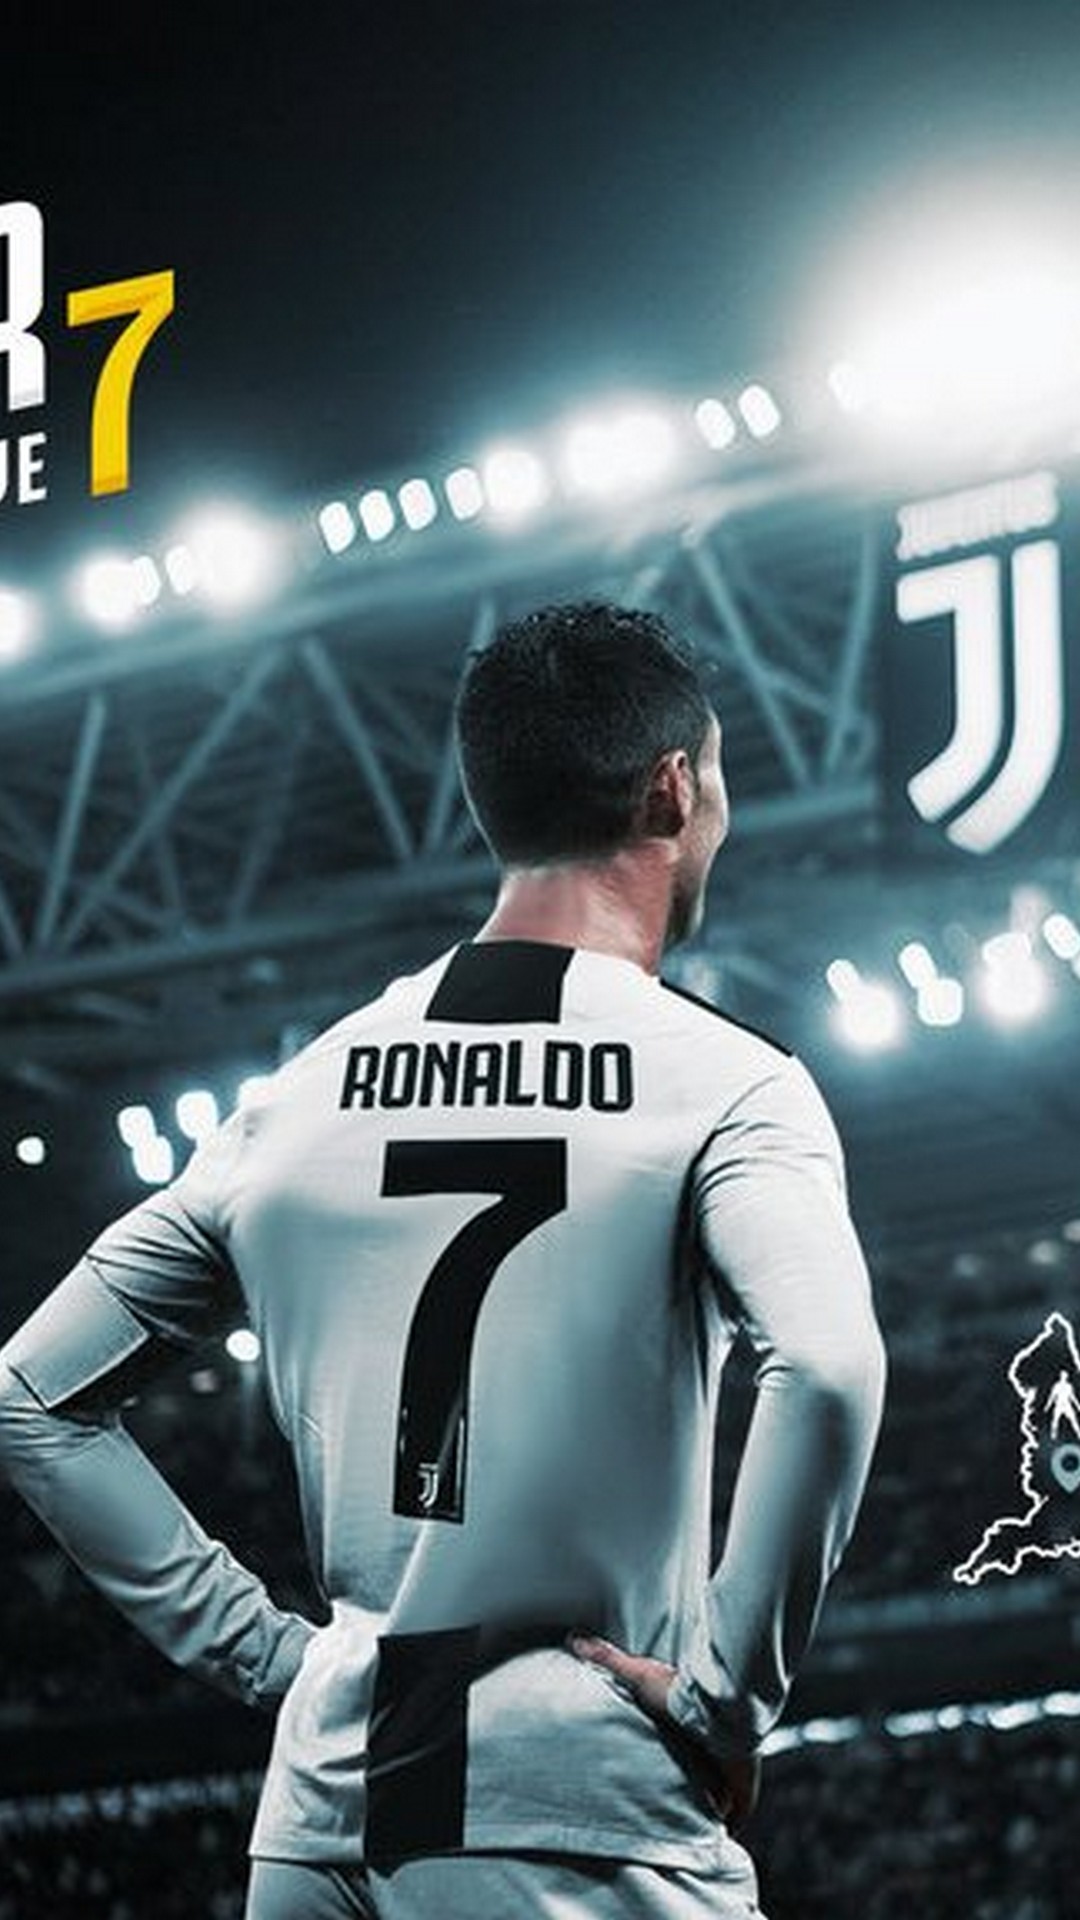 CR7 Juventus iPhone Wallpaper with resolution 1080X1920 pixel. You can make this wallpaper for your iPhone 5, 6, 7, 8, X backgrounds, Mobile Screensaver, or iPad Lock Screen